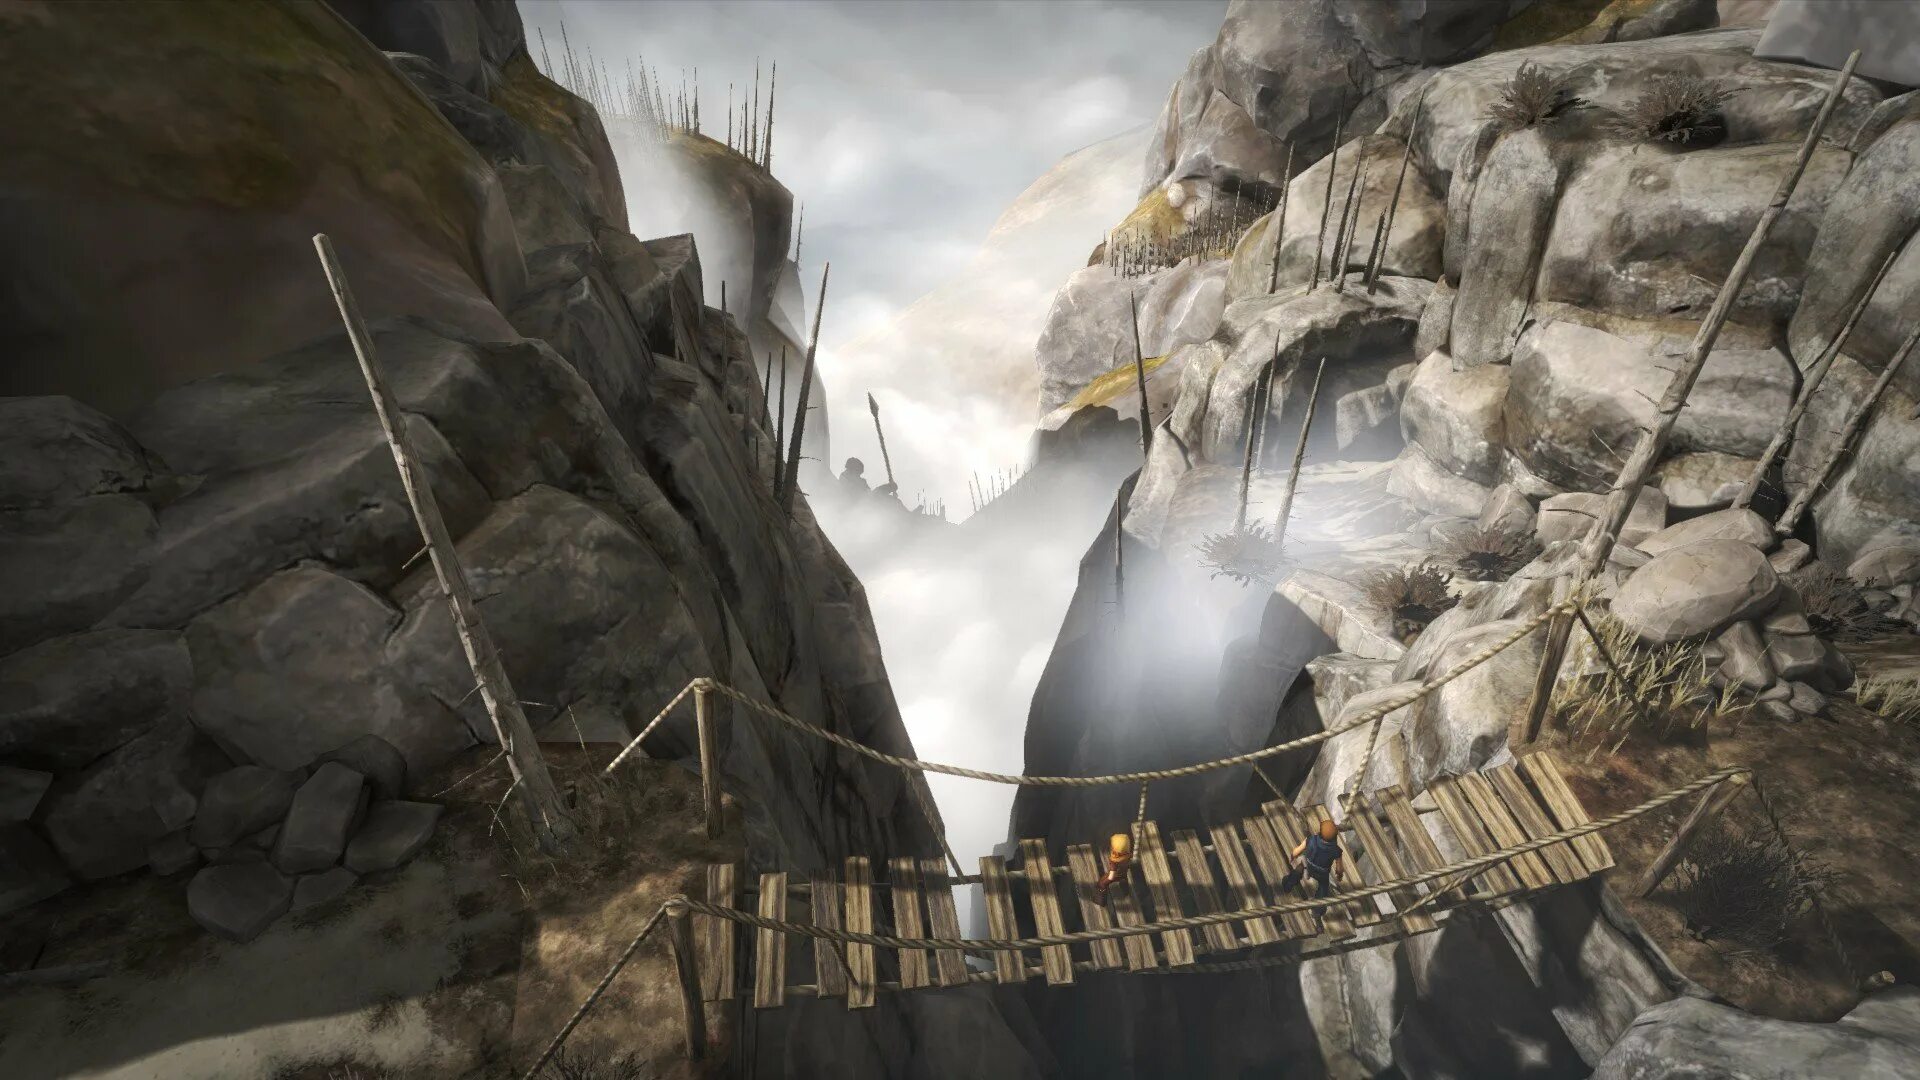 Brothers: a Tale of two sons. Brothers: a Tale of two sons (2013). Brothers a Tale of two sons диск. Brothers: a Tale of two sons (2013) игры. Brother two sons прохождение